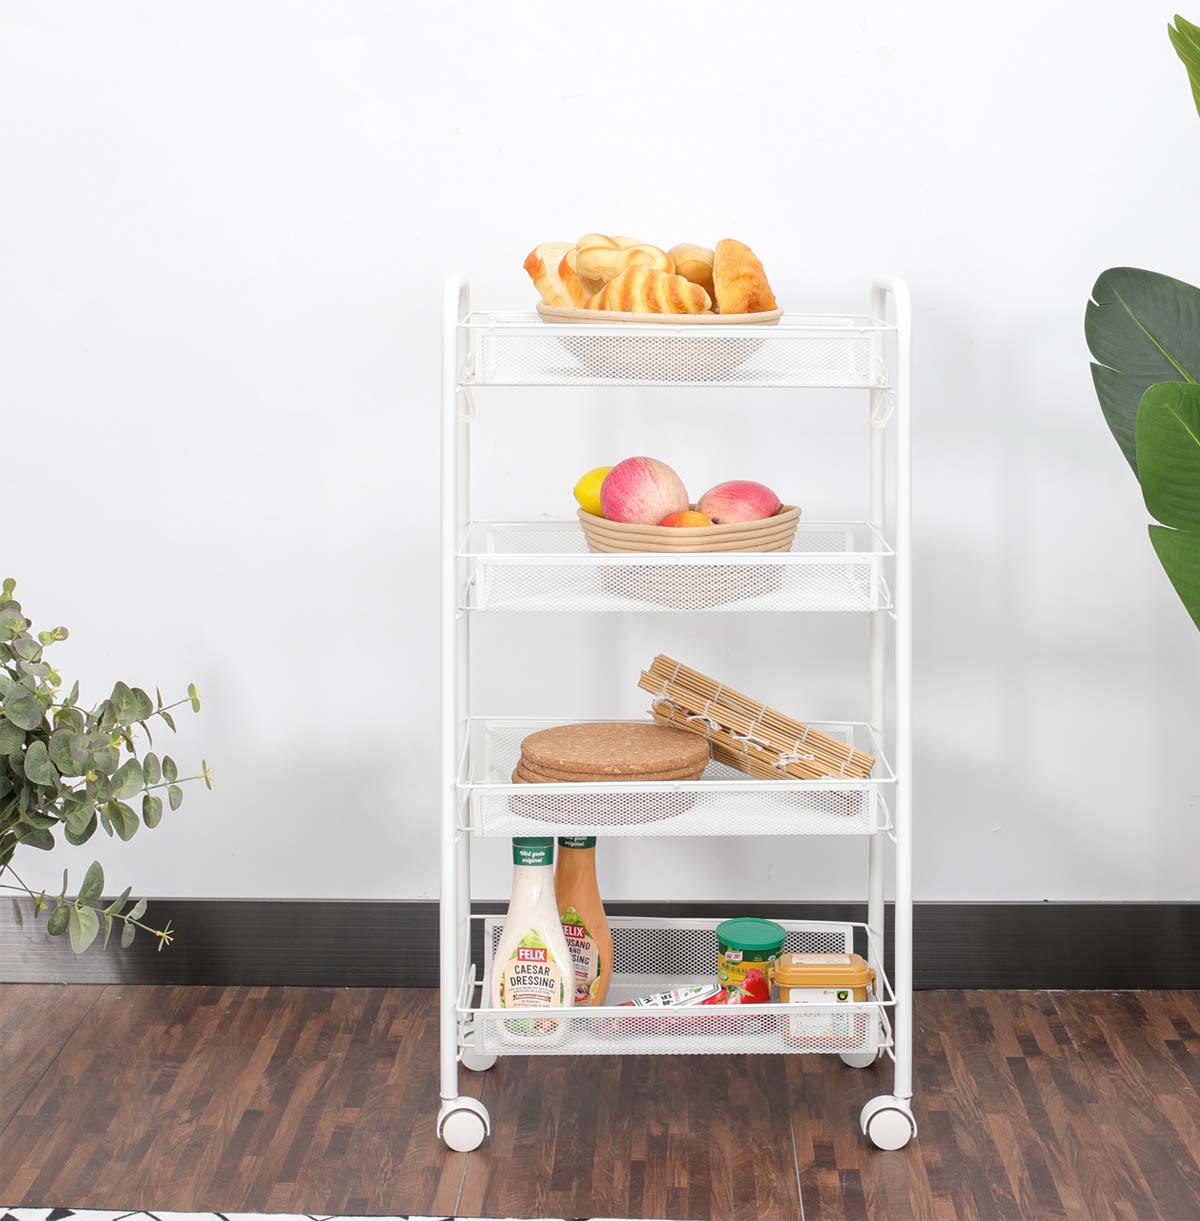 4-Tier Metal Utility Rolling Cart / Mesh Wire Storage Trolley / Slide Out Storage Shelving Units for Kitchen Bathroom Laundry Roomon Wheels with Hooks